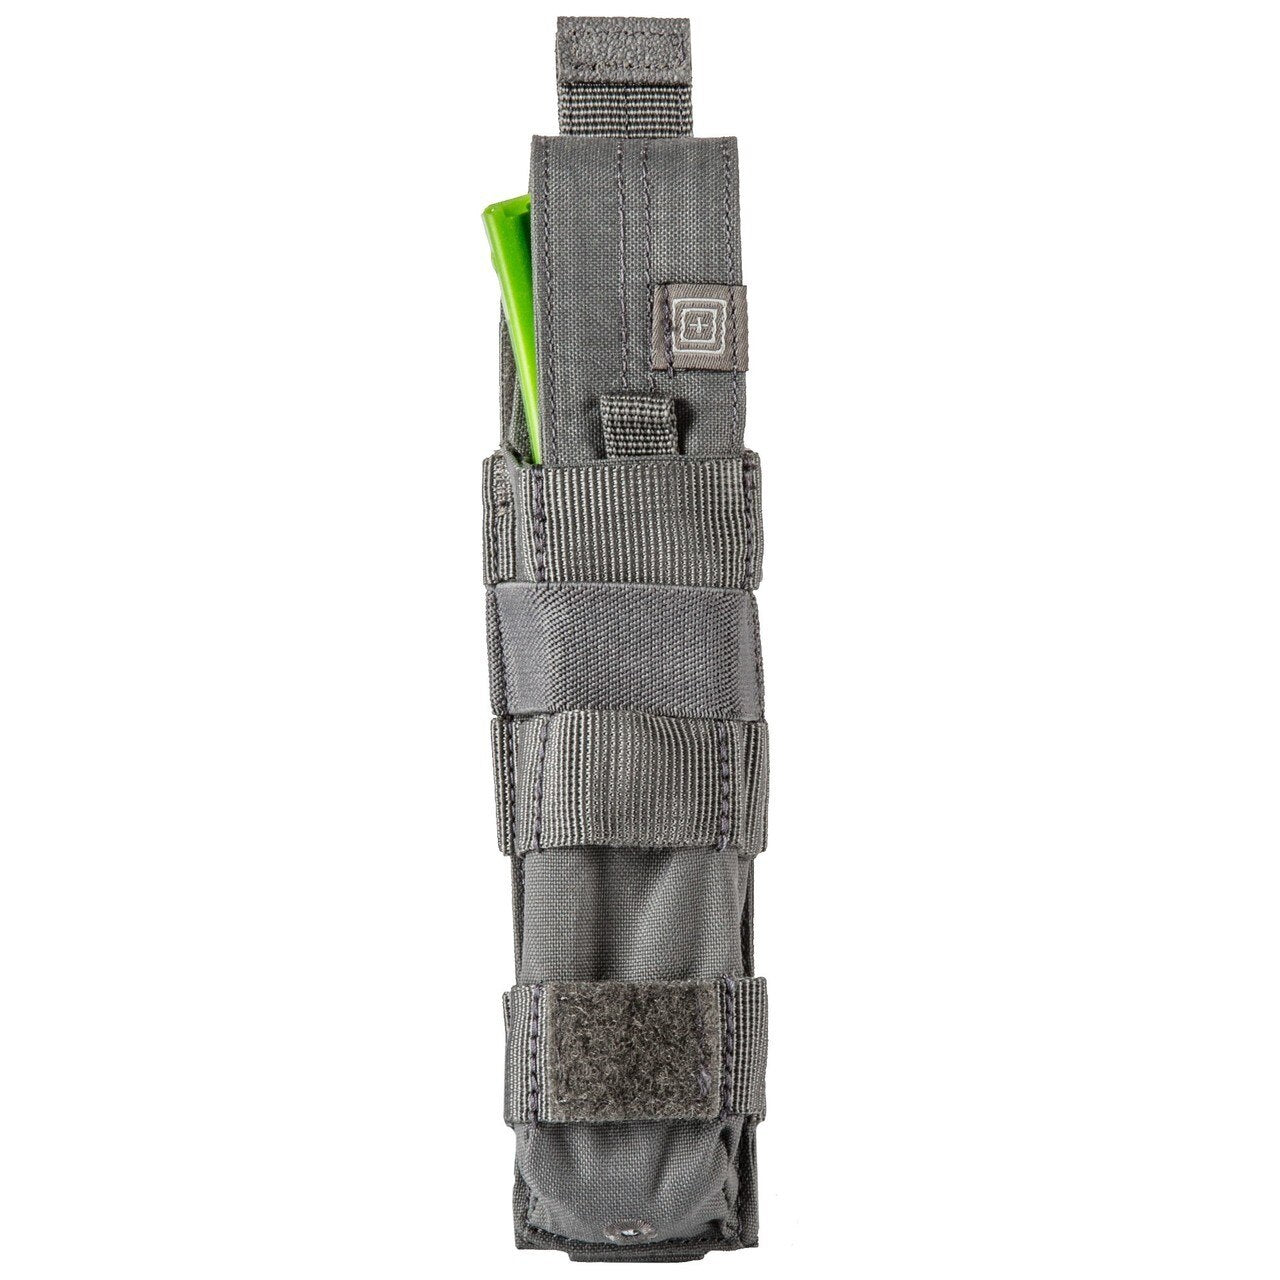 56160 - Mp5 Bungee with Cover Single Pouch